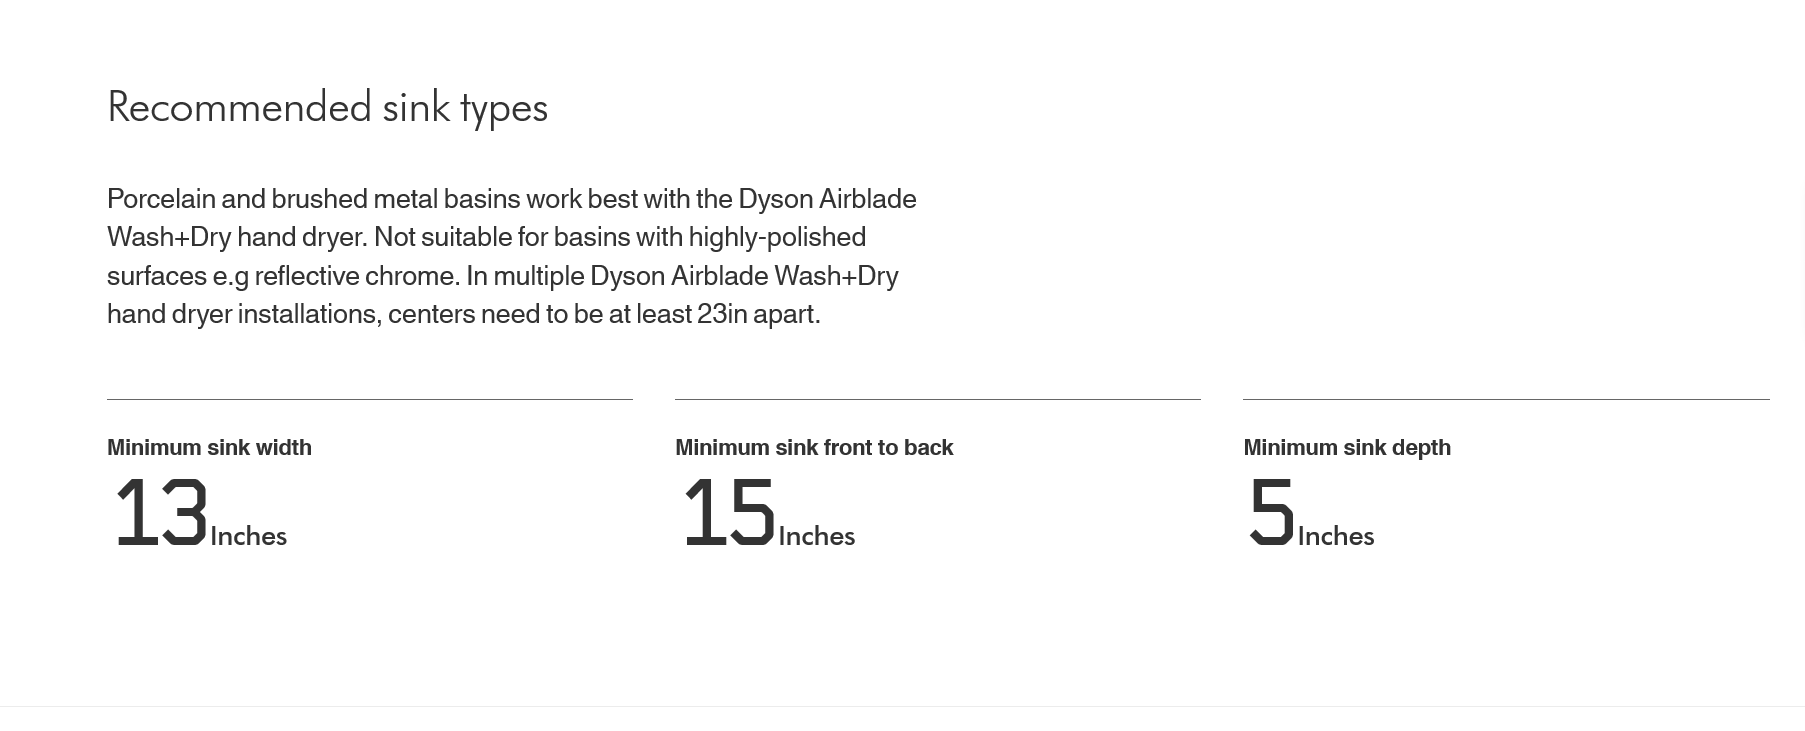 Dyson-Airblade-Wash-Dry-Faucet-Hand-Dryer-Combination-WD04-WD05-WD06-Recommended-Sink-Types